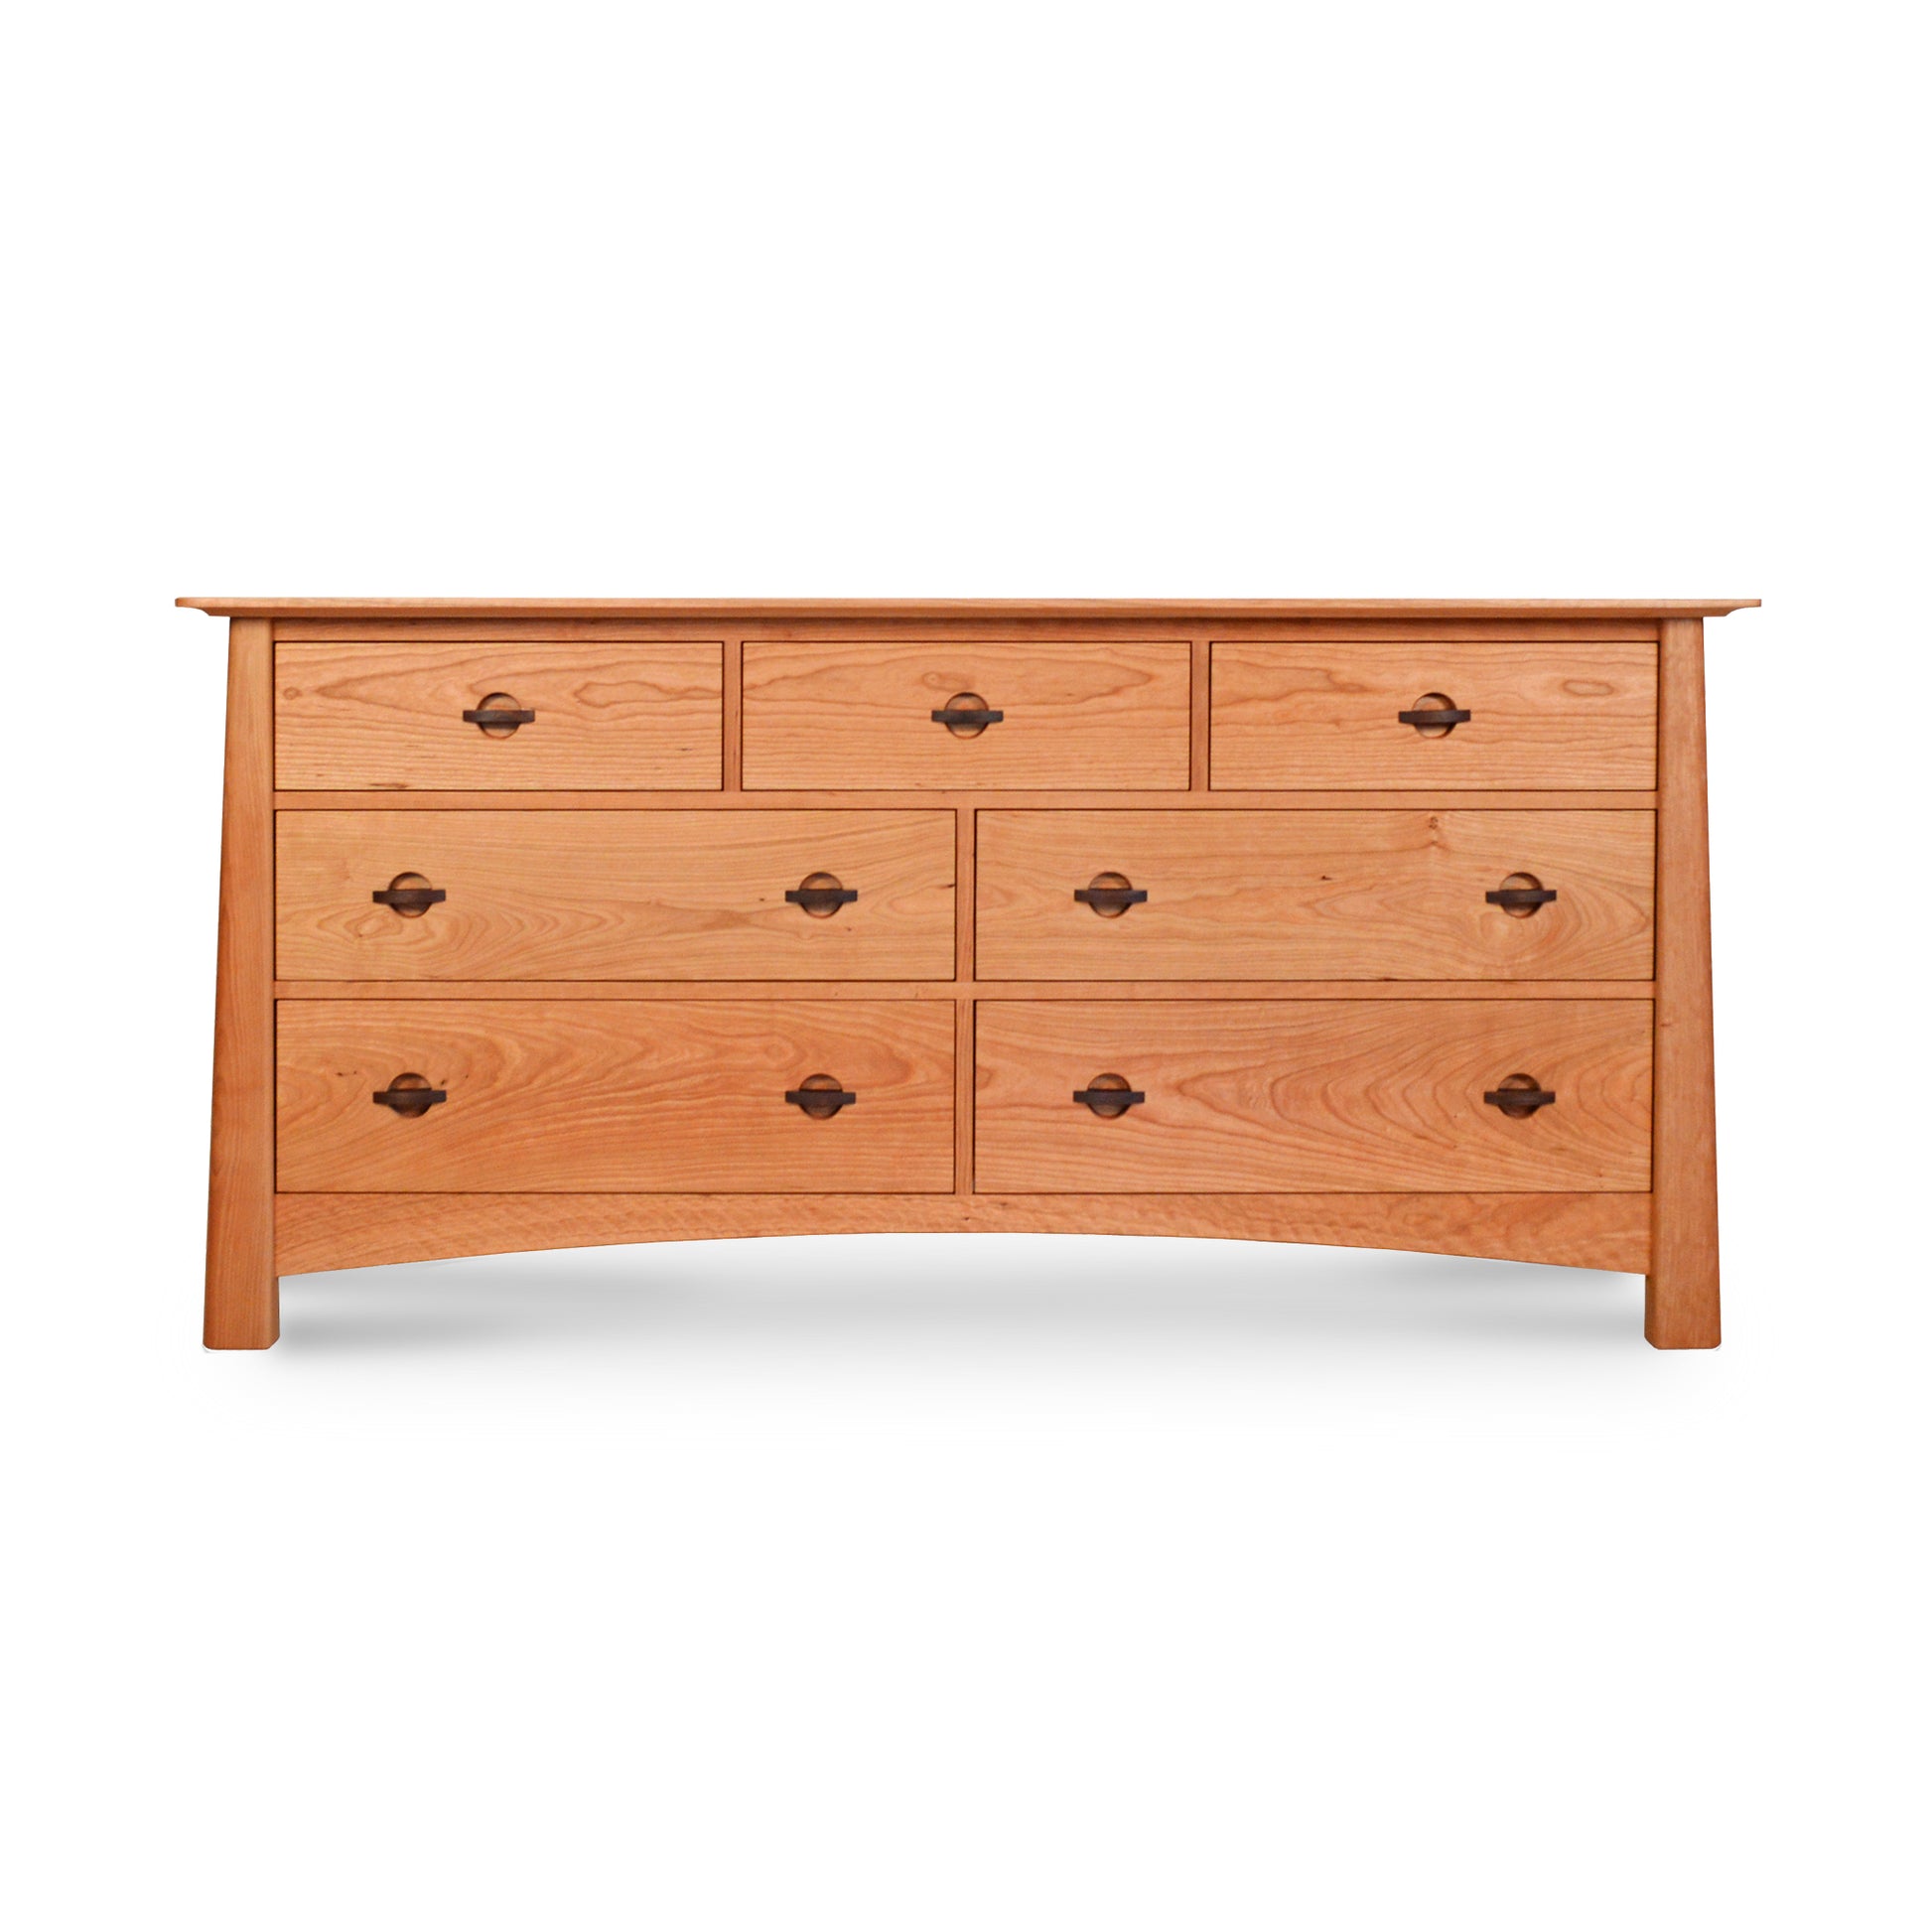 A Maple Corner Woodworks Cherry Moon 7-Drawer Dresser, made of sustainably harvested solid woods, on a white background.